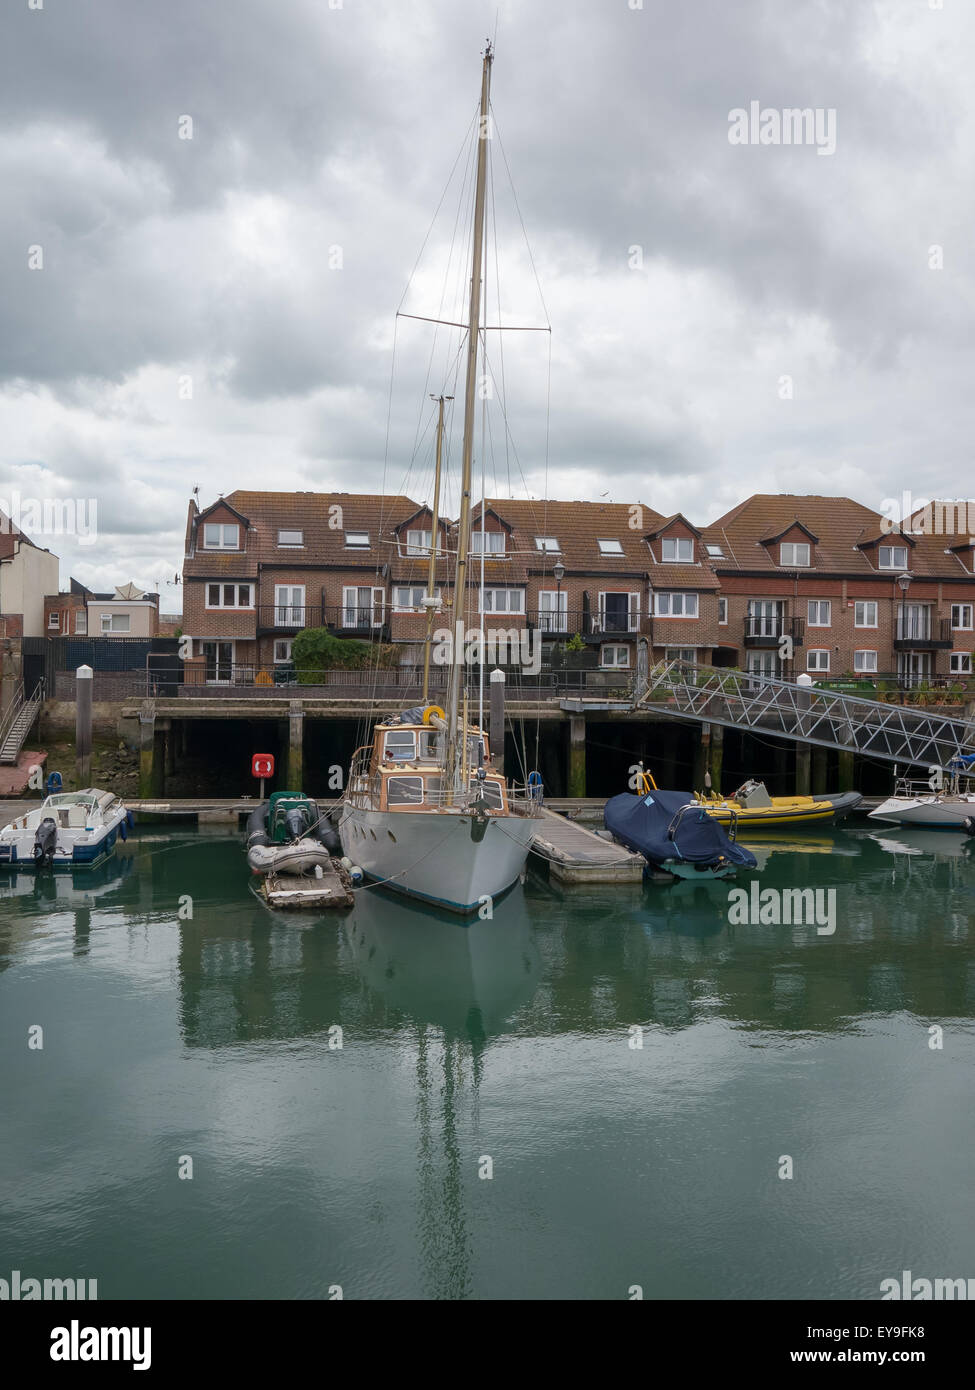 A leisure sailing boat moored in a private mooring beside housing at camber docks, Old Portsmouth, England Stock Photo